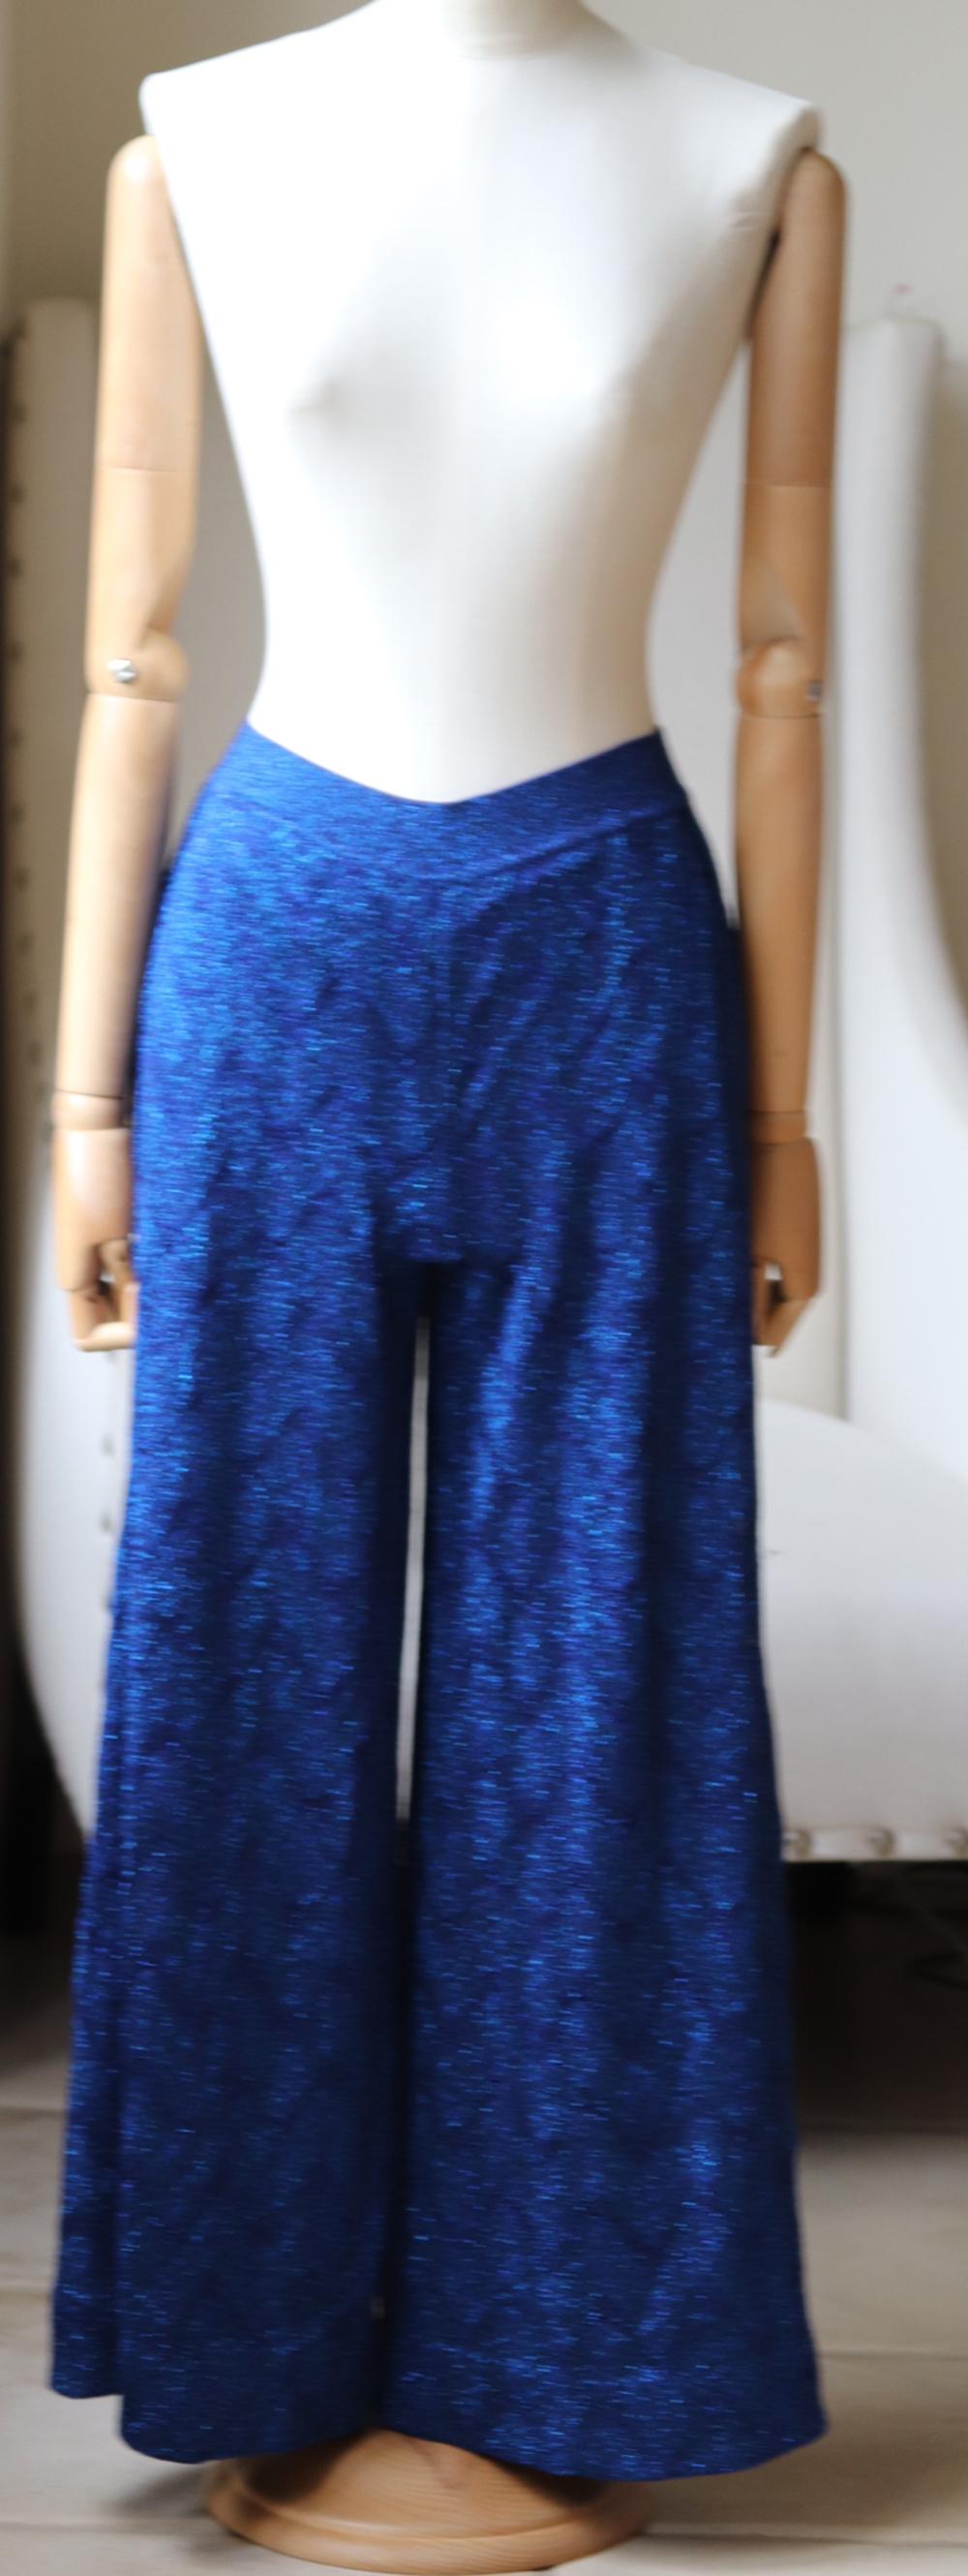 Missoni's pants are woven in the house's signature zig-zag pattern.
Finished with light-catching metallic threads, this pair has a cropped wide leg silhouette that will flatter and elongate your frame. 
Blue cupro, polyester and viscose blend.
Pull